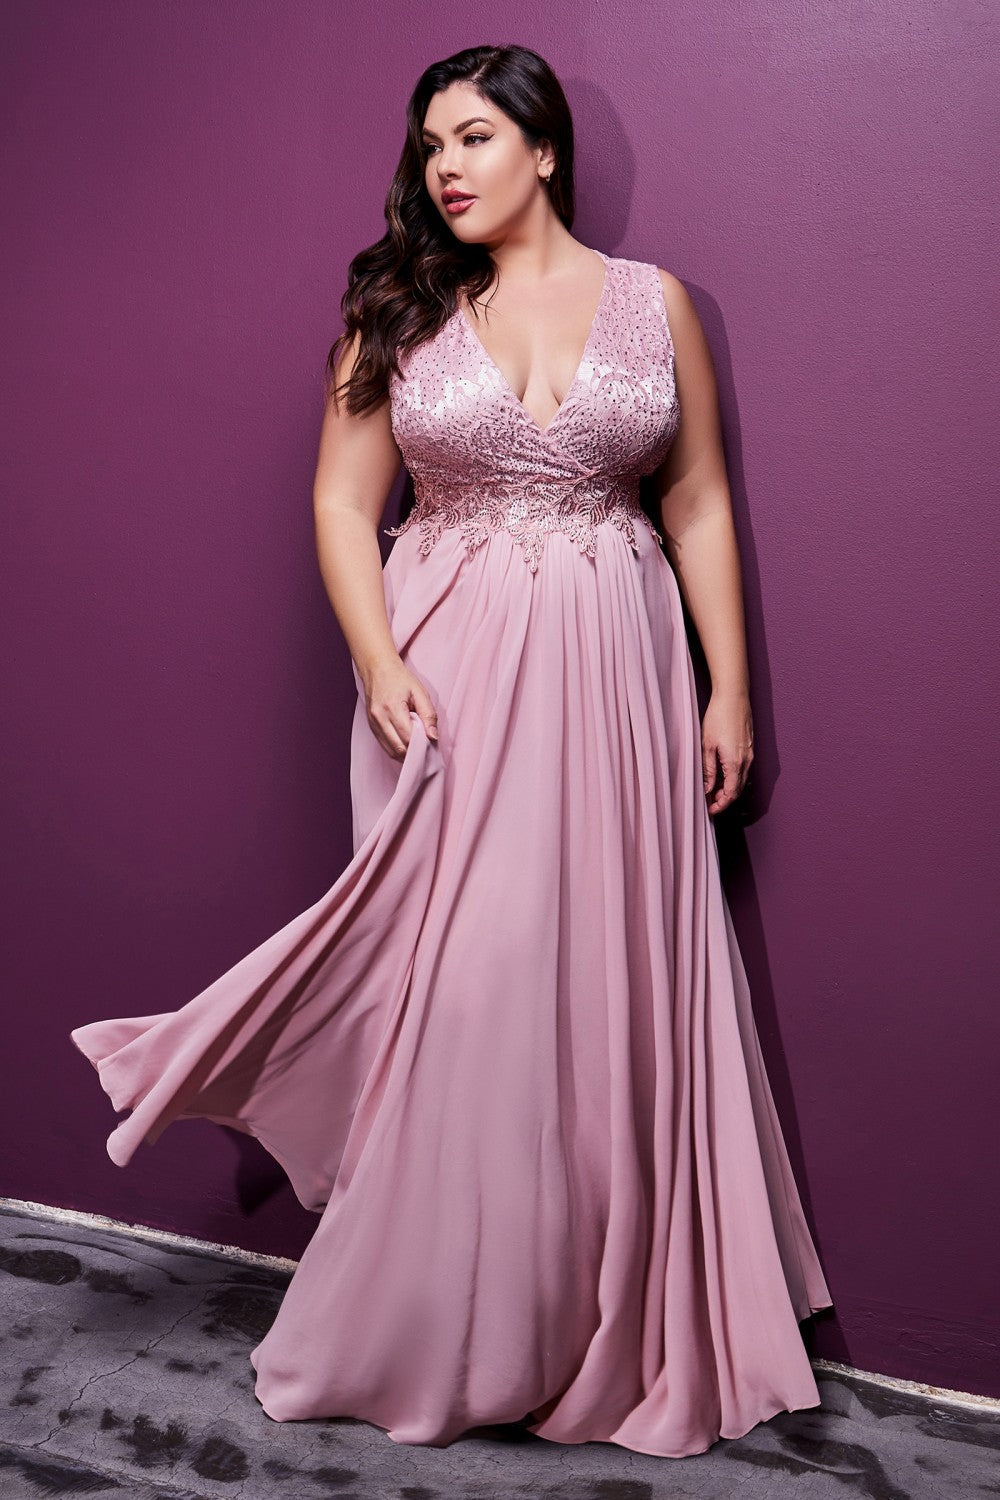 A-line Curve Chiffon Prom & Bridesmaid Dress Evening Plus Size Charming Tender Gown Laced Vintage V-neck Tank Strap Bodice CDS7201 Sale Elsy Style All Dresses